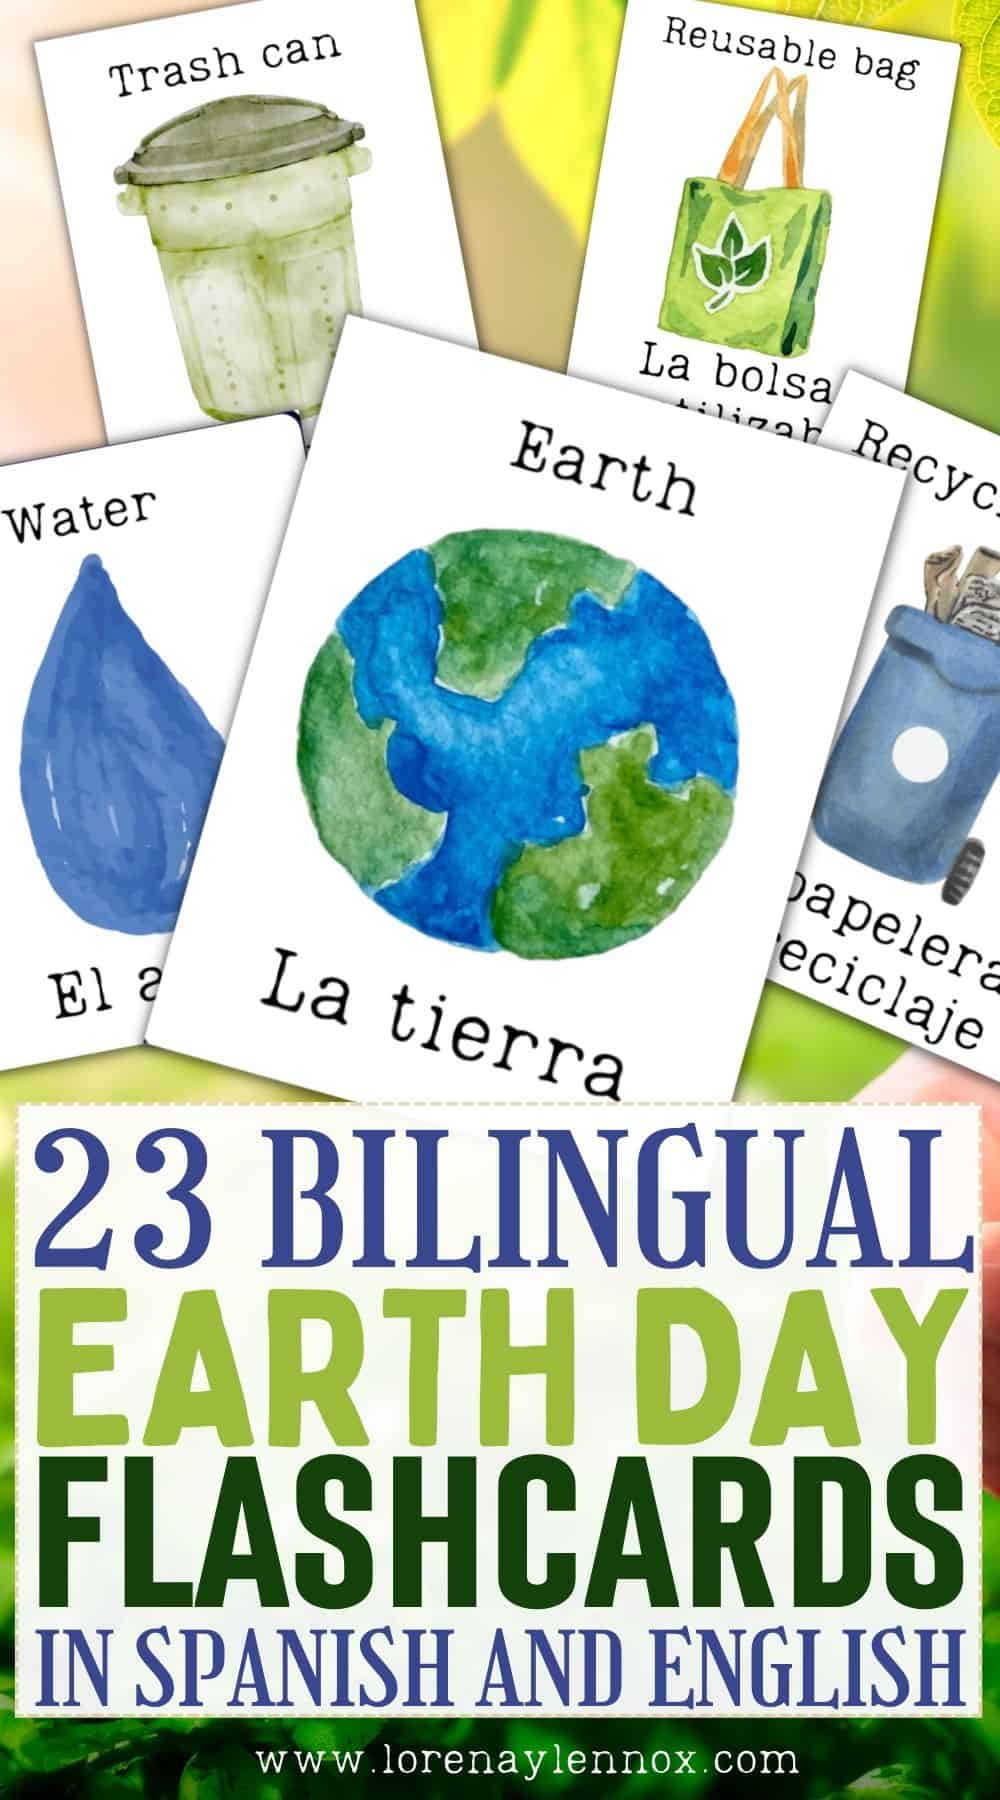 Bilingual Earth Day Flashcards in Spanish and English